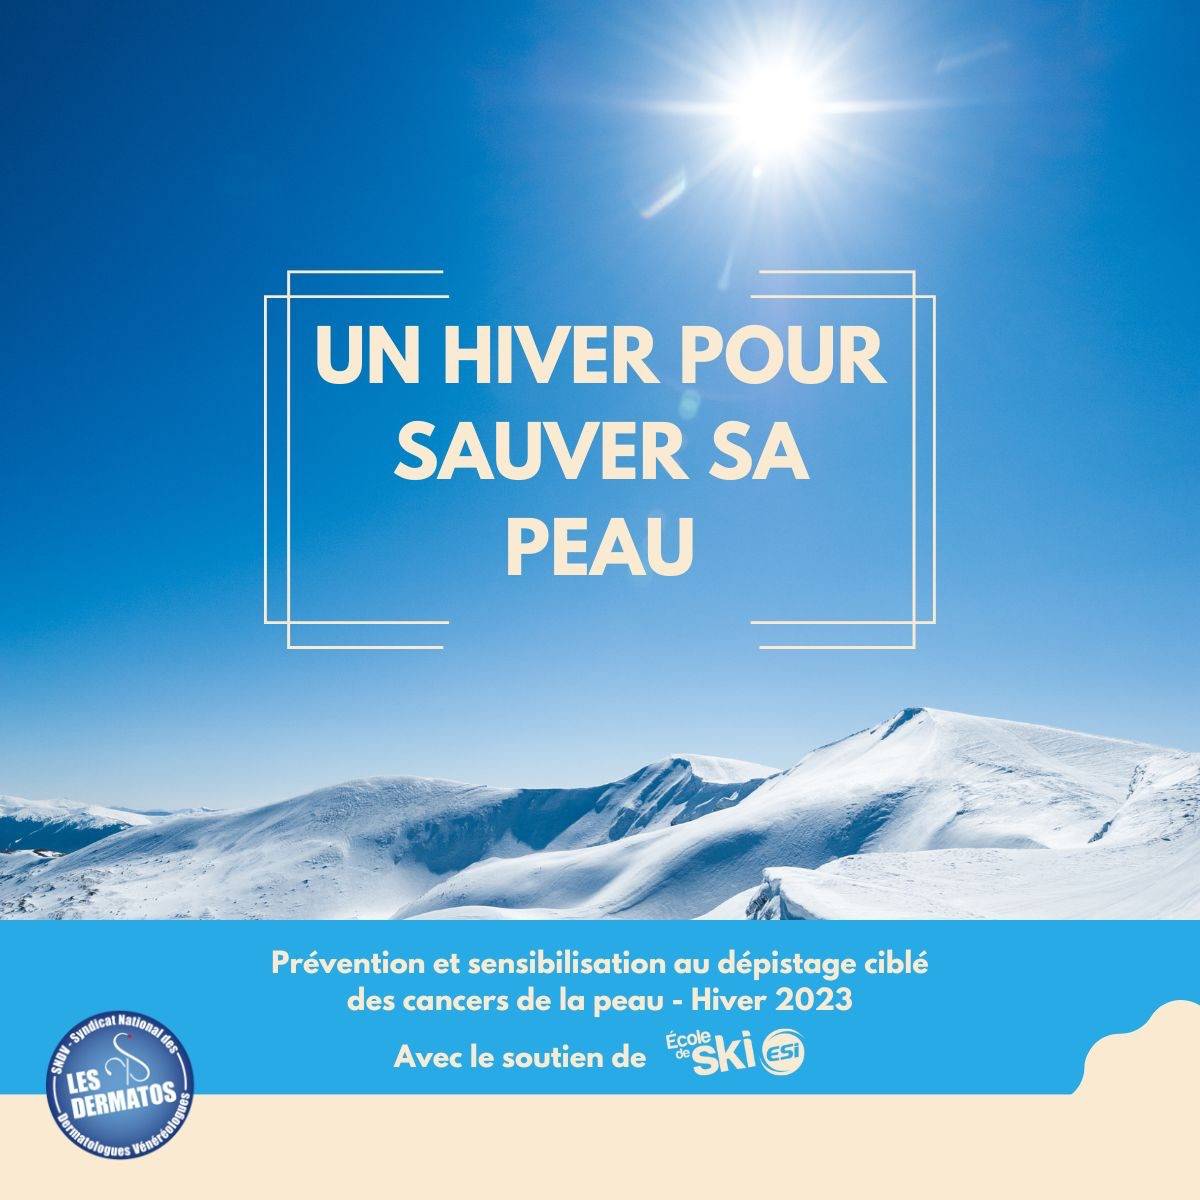 Campaign for the prevention of skin cancers : even in winter, beware of UV!